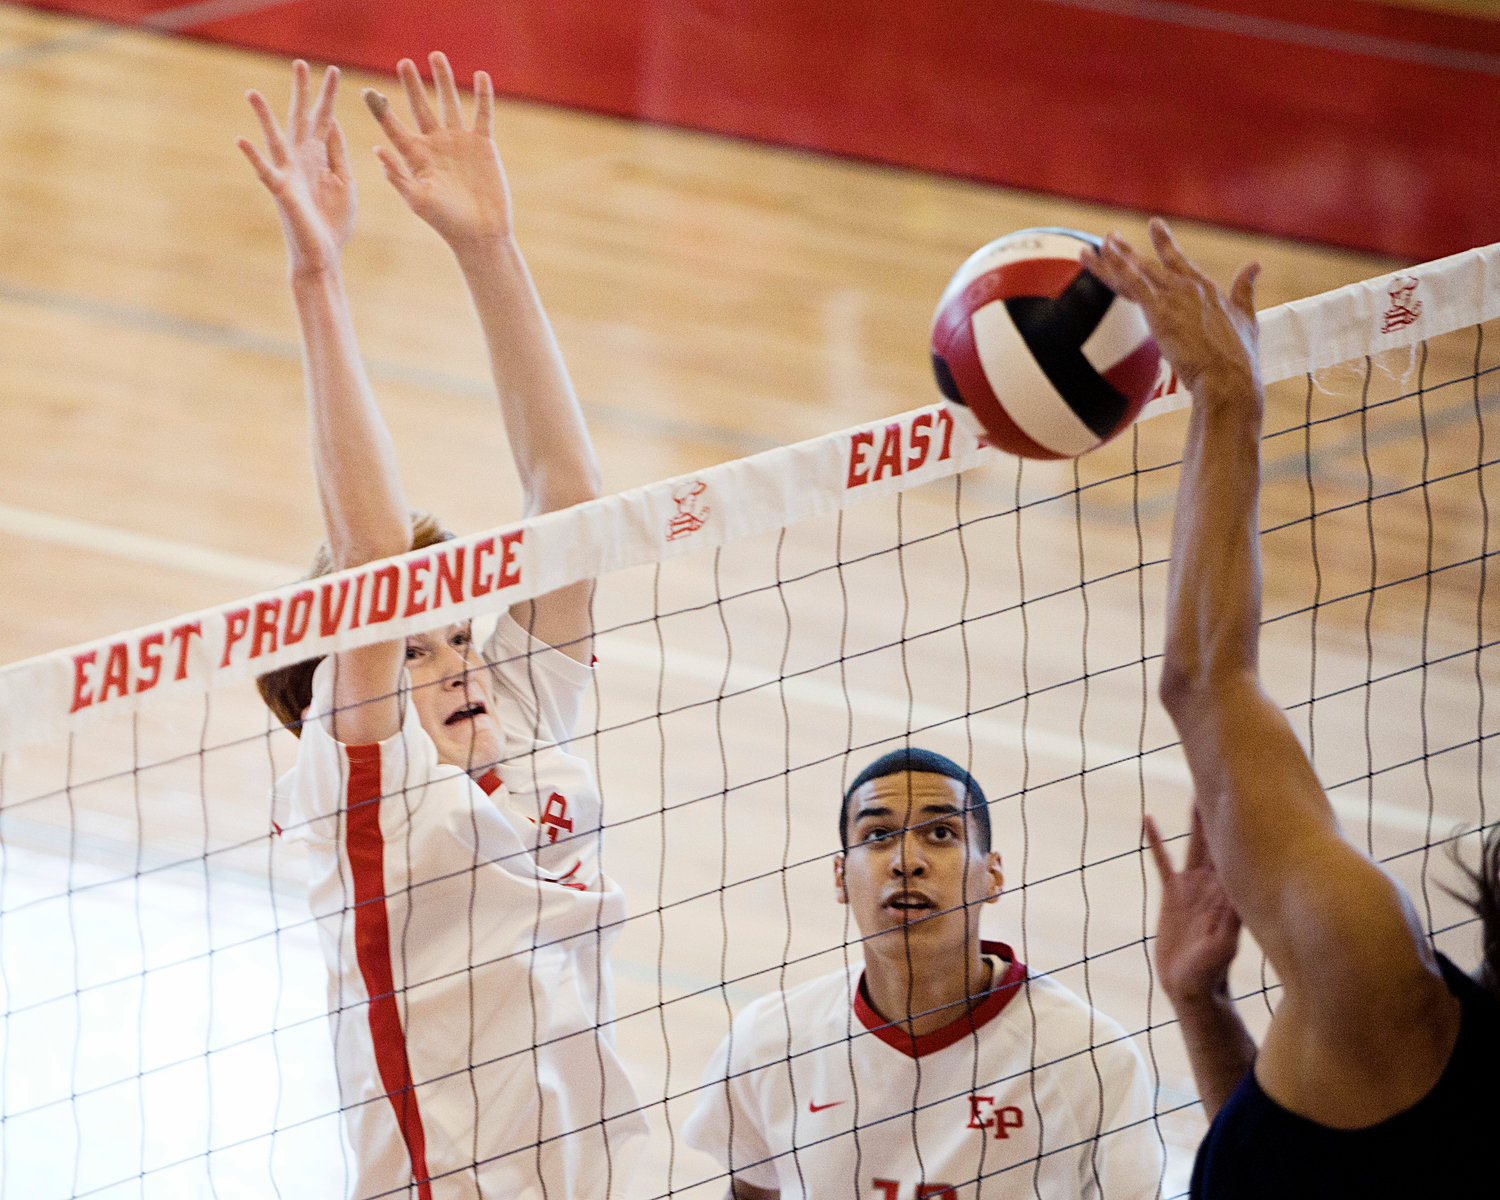 East Providence High School’s Kyle Dunn jumps to block the net as Grant Wosencroft looks on.